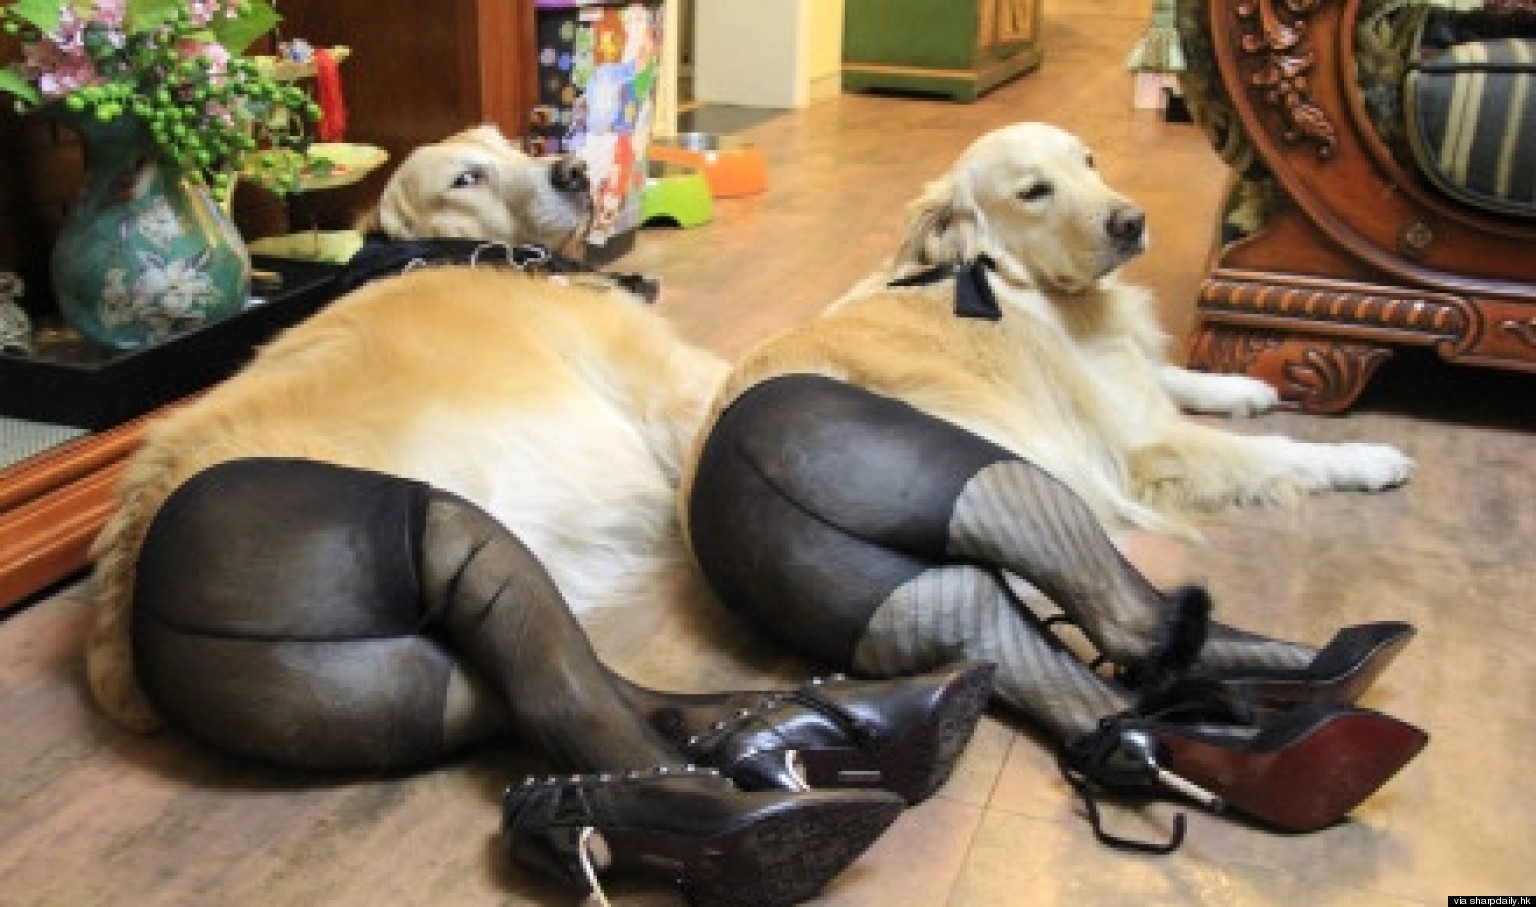 o-DOGS-IN-PANTYHOES-facebook.jpg